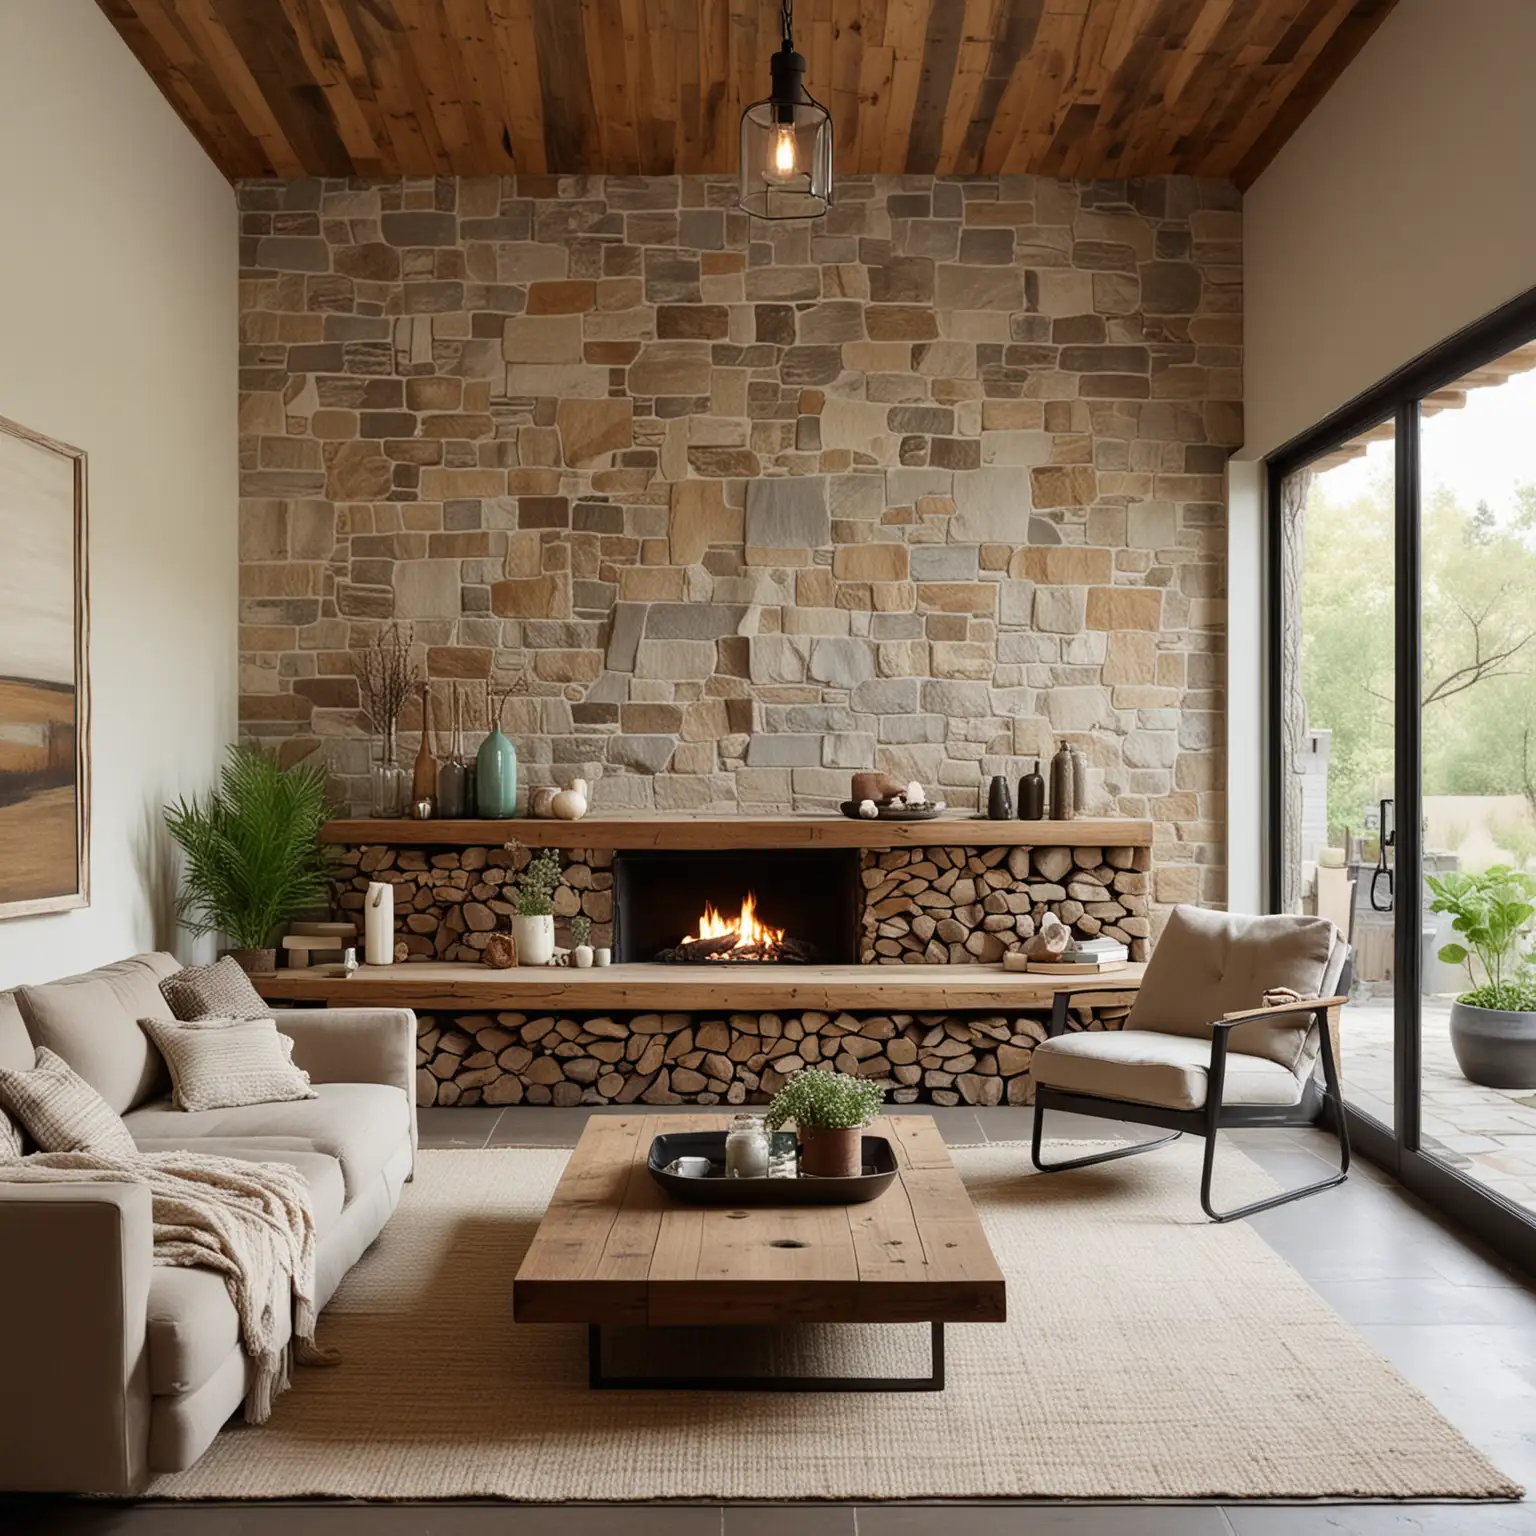 Minimalist-Modern-Living-Room-with-Rustic-Accents-and-Reclaimed-Wood-Feature-Wall